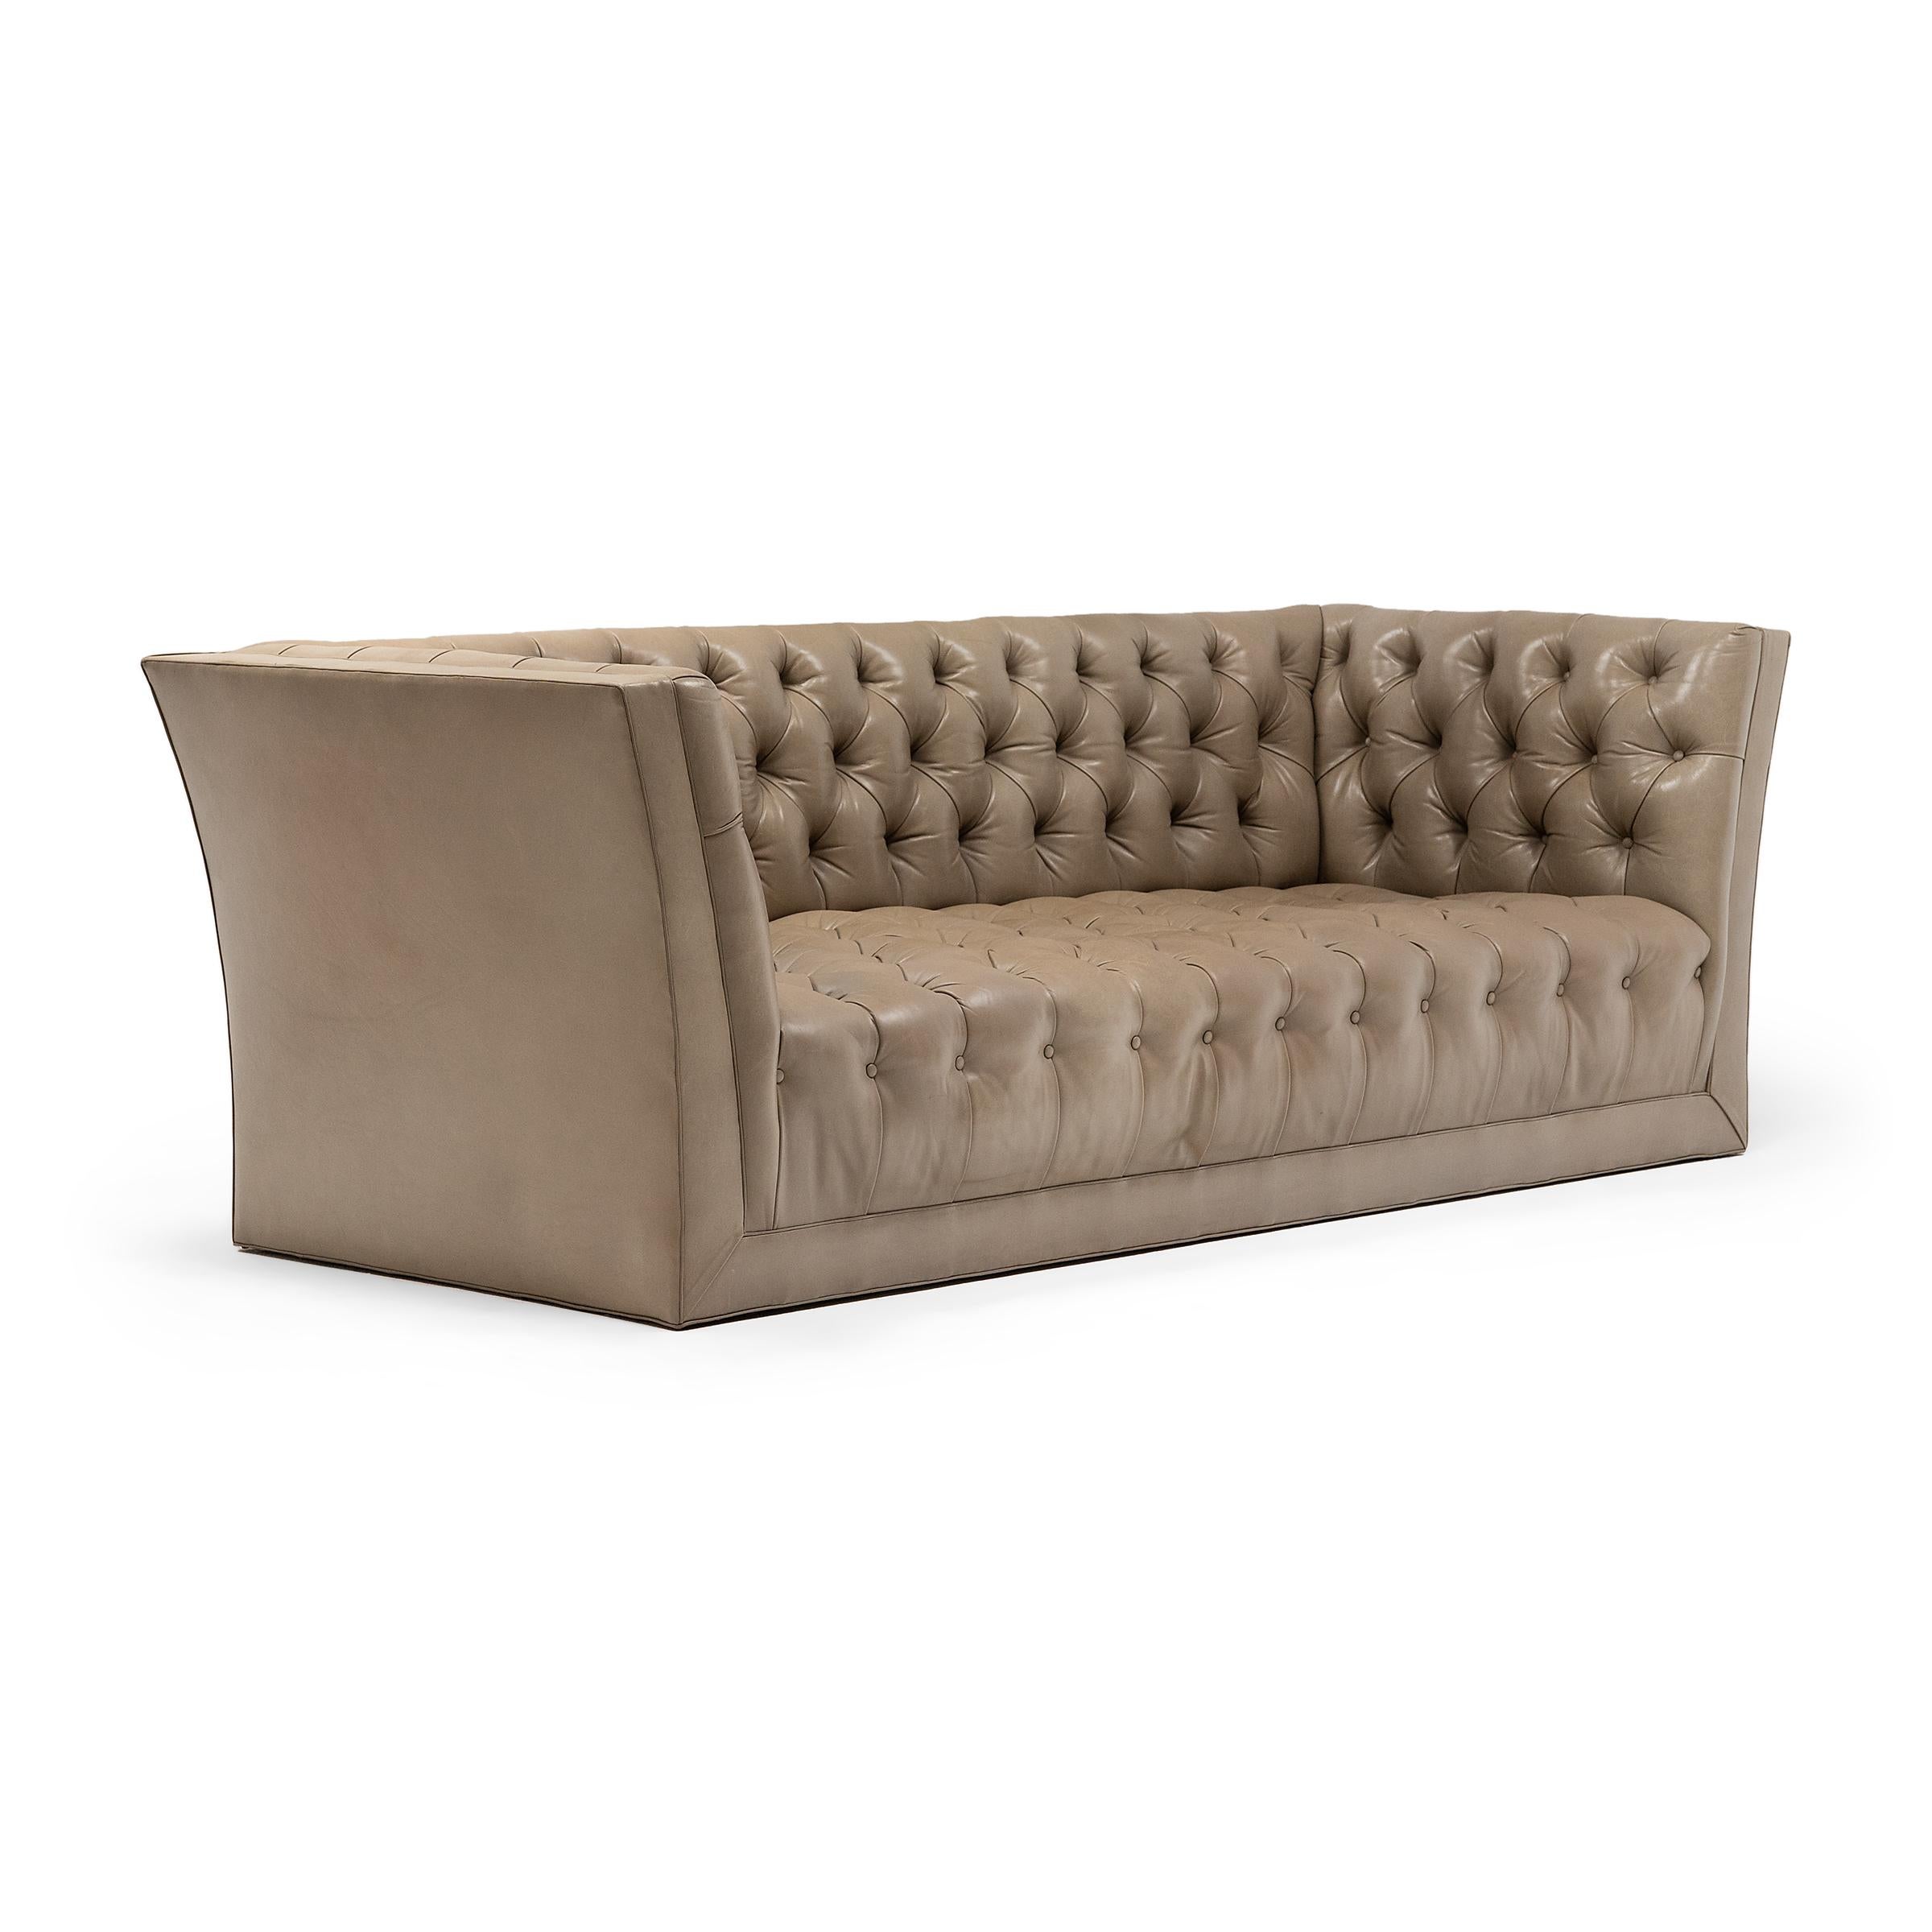 American Modern Tufted Leather Sofa For Sale